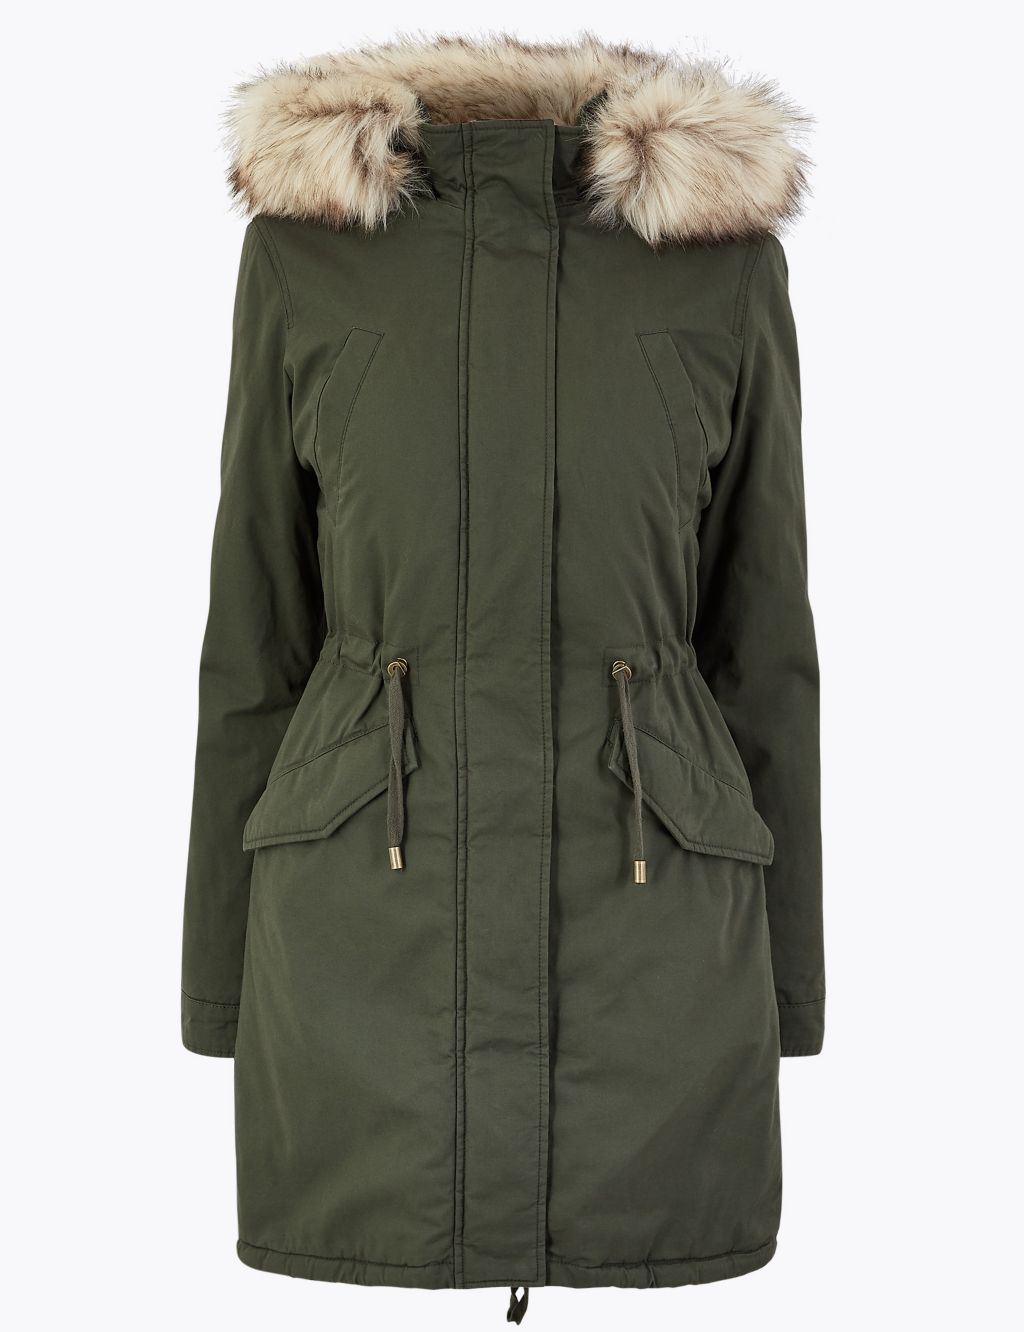 Borg Lined Parka | M&S Collection | M&S